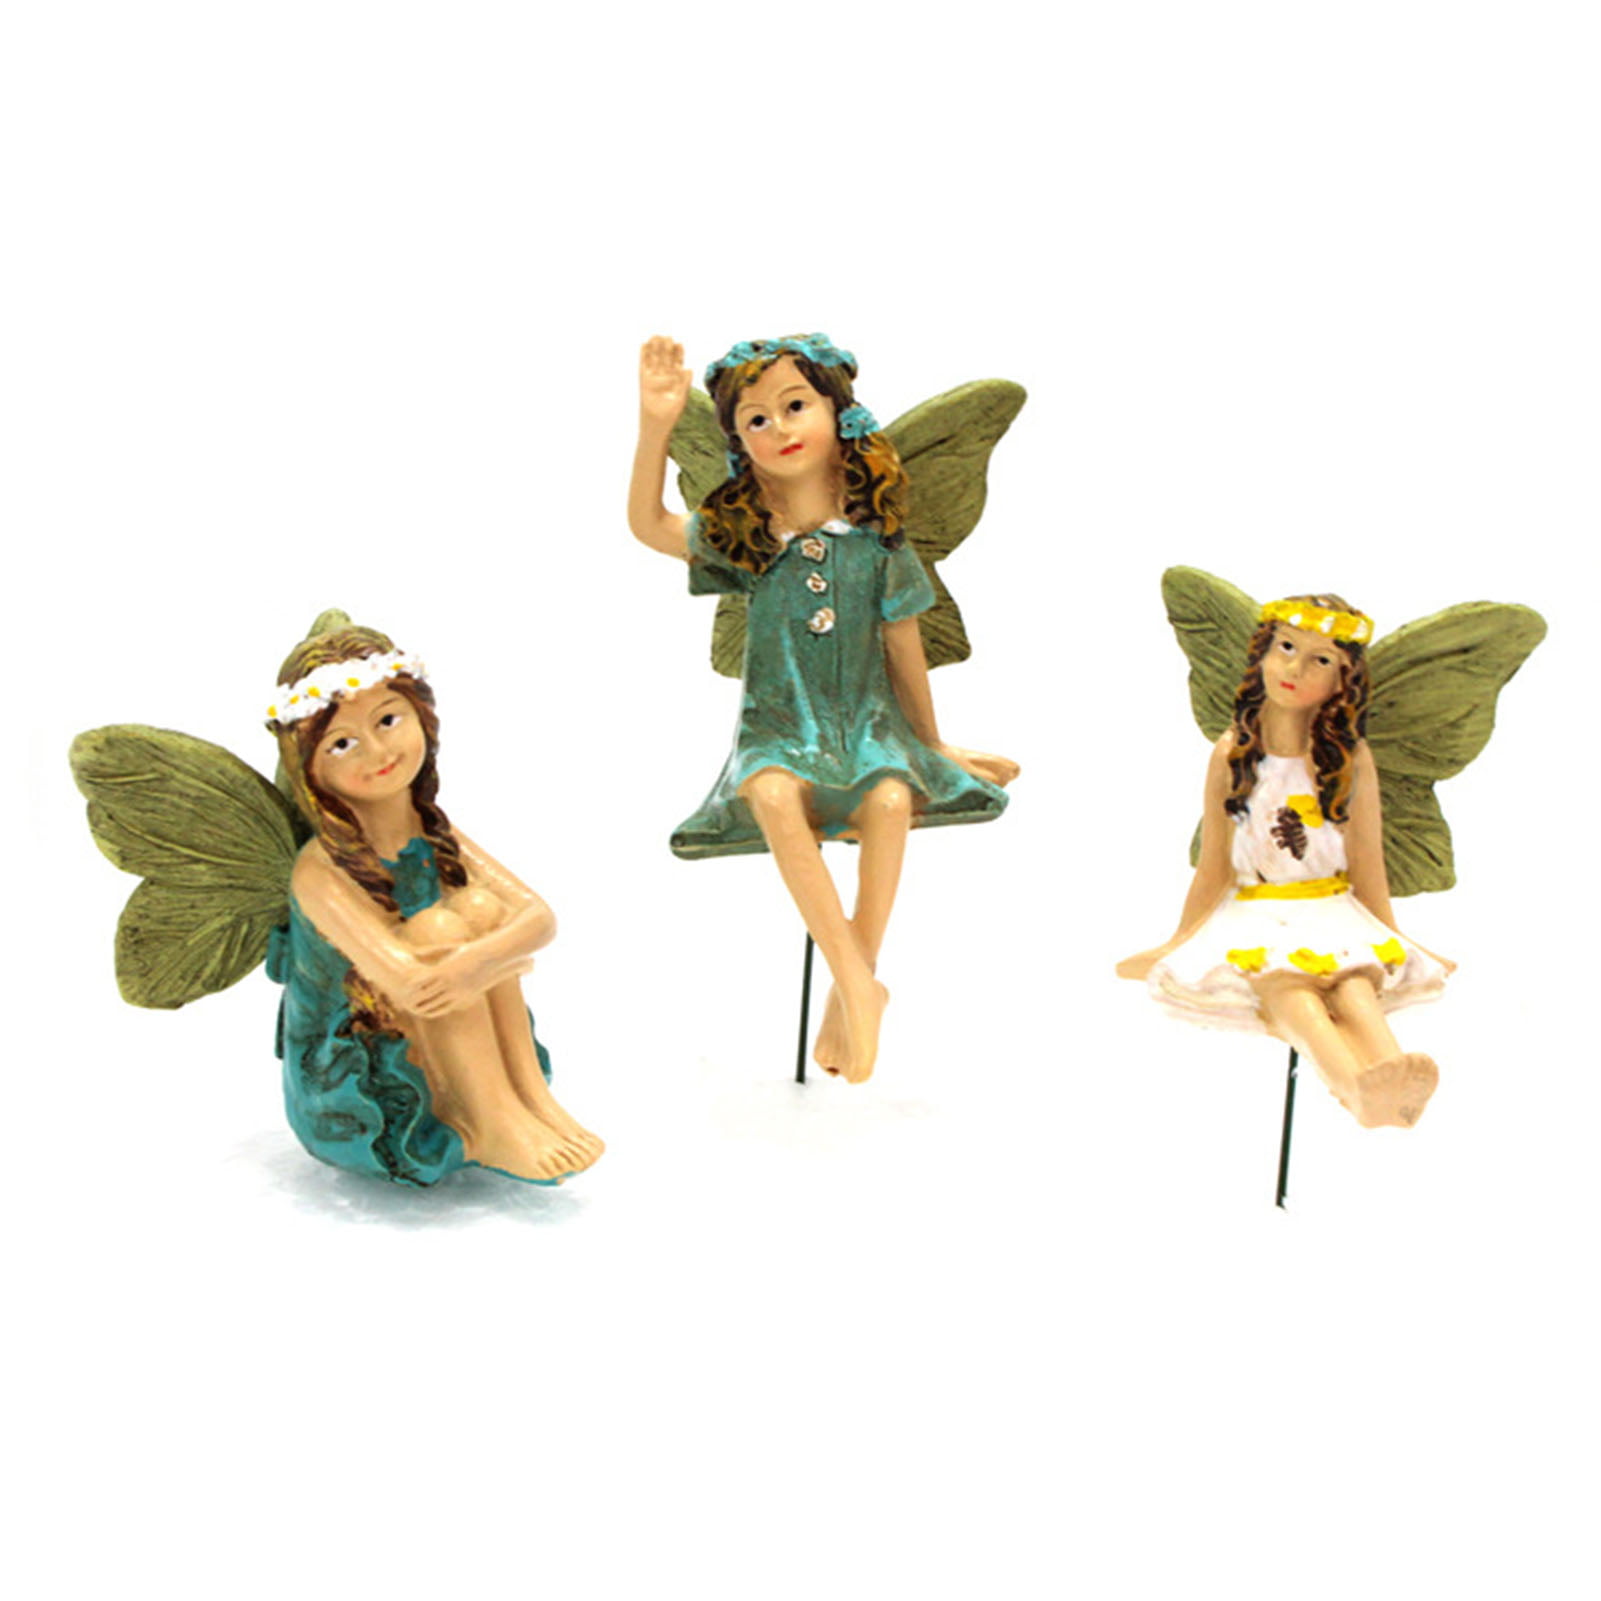 Vosarea 6pcs Christmas Miniature Ornament Bear Fairy Garden Figurines Micro Landscape Decoration for Holiday Party Supplies Favors Gifts